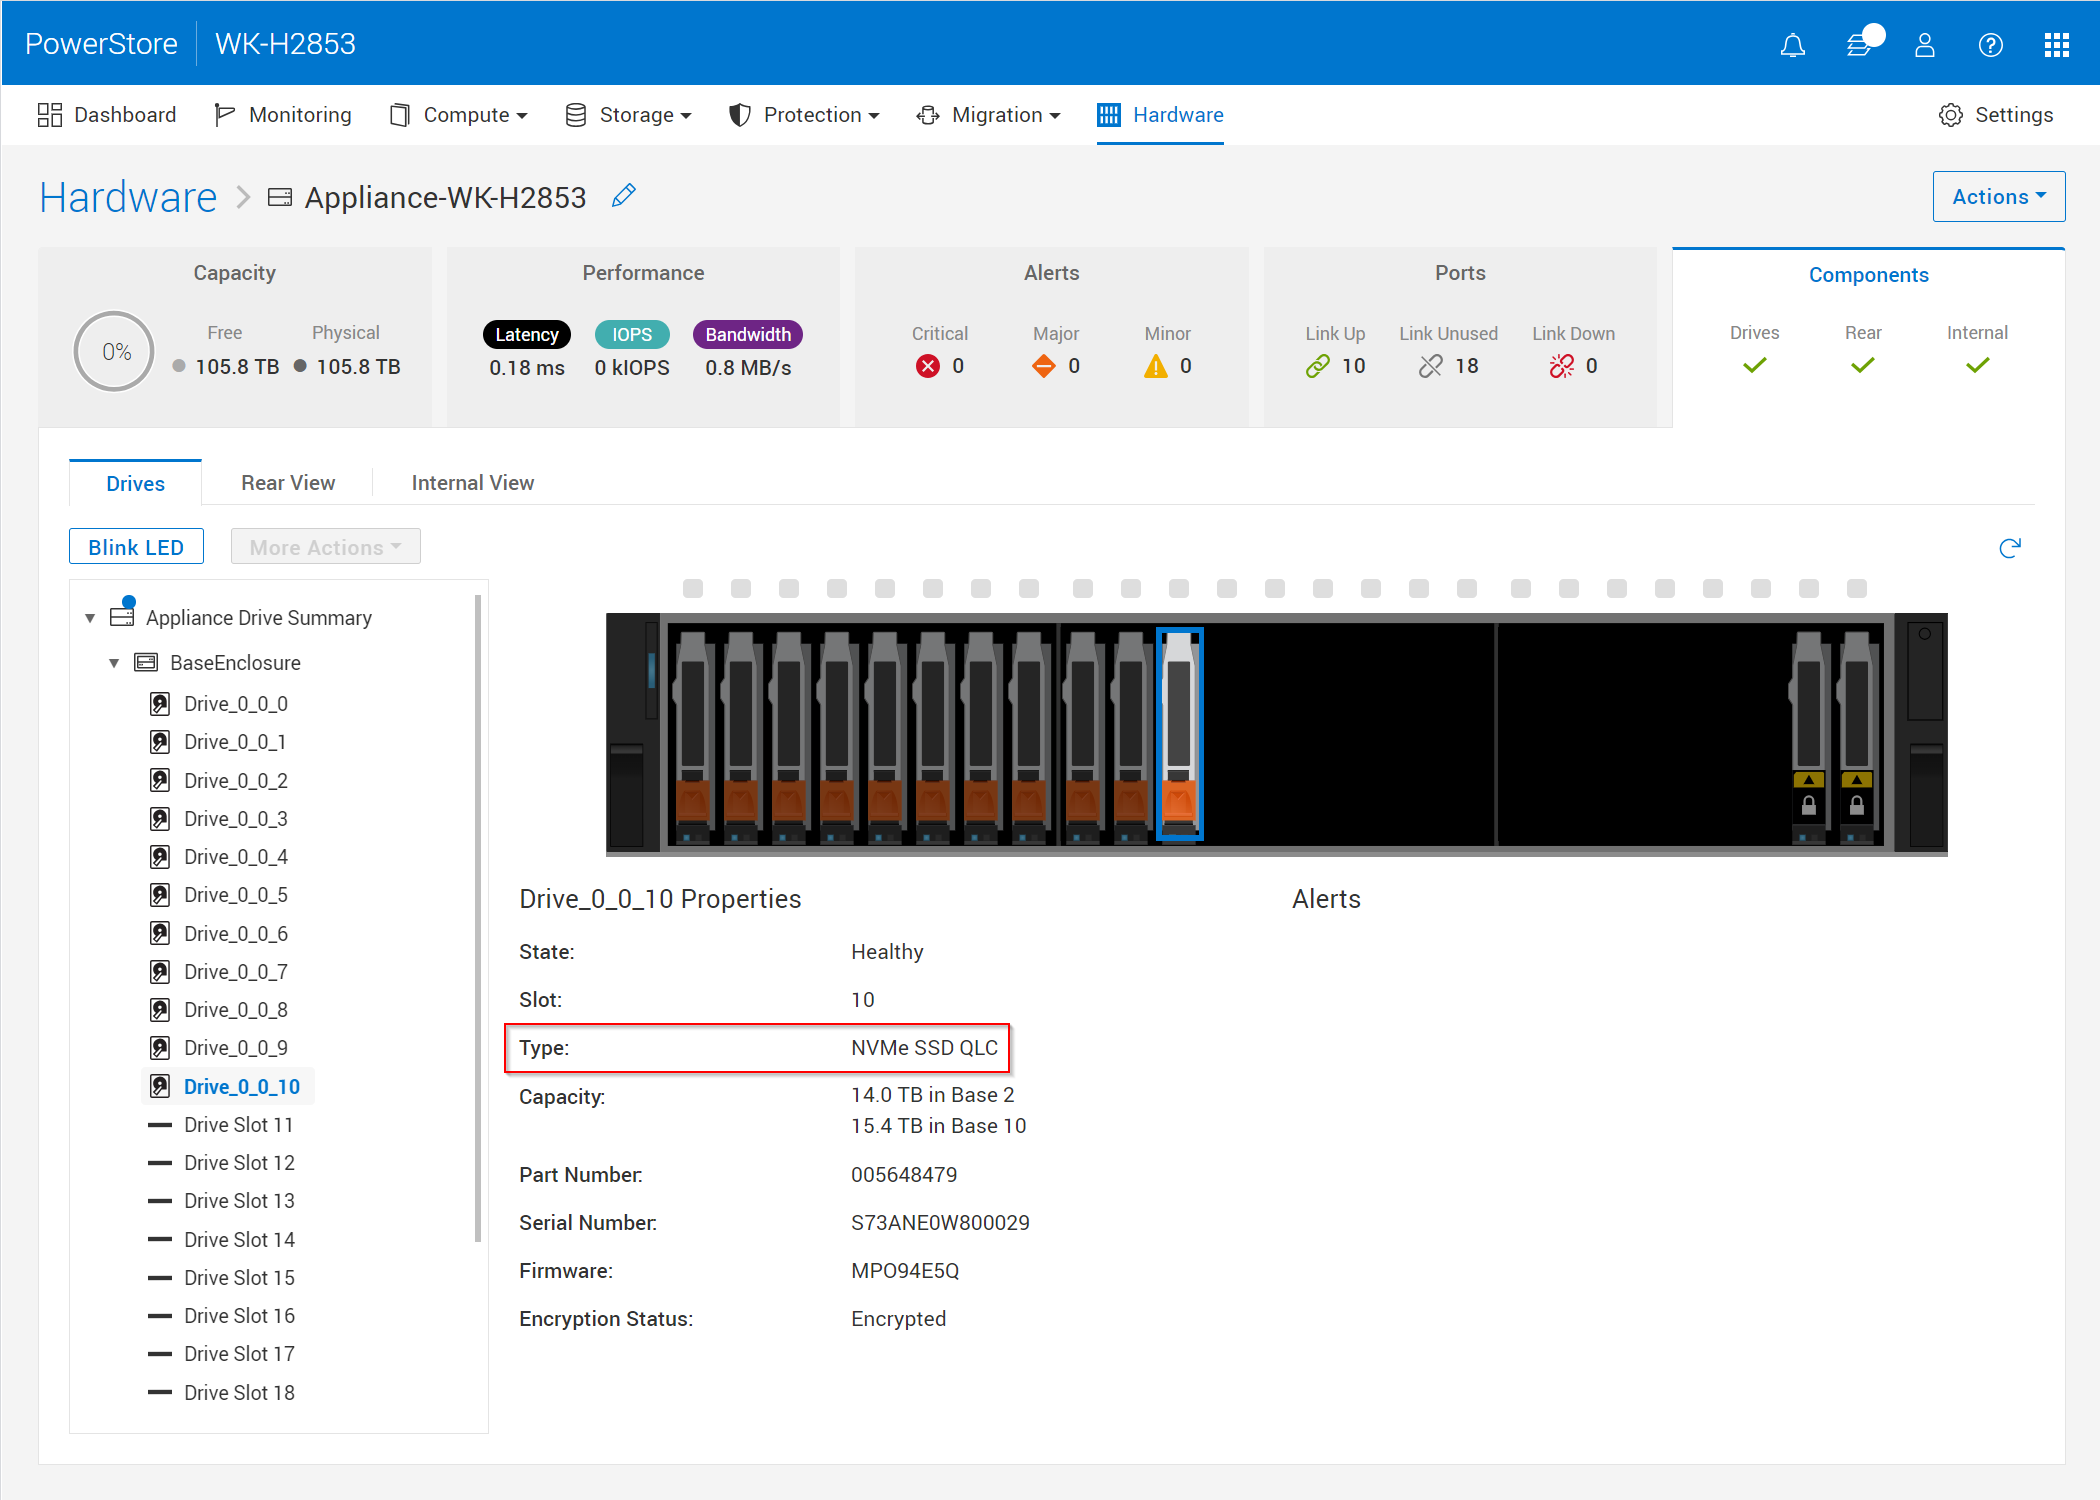 A screenshot of PowerStore Manager showing the Drives page. A drive is highlighted showing that it is a NVMe SSD QLC drive type.